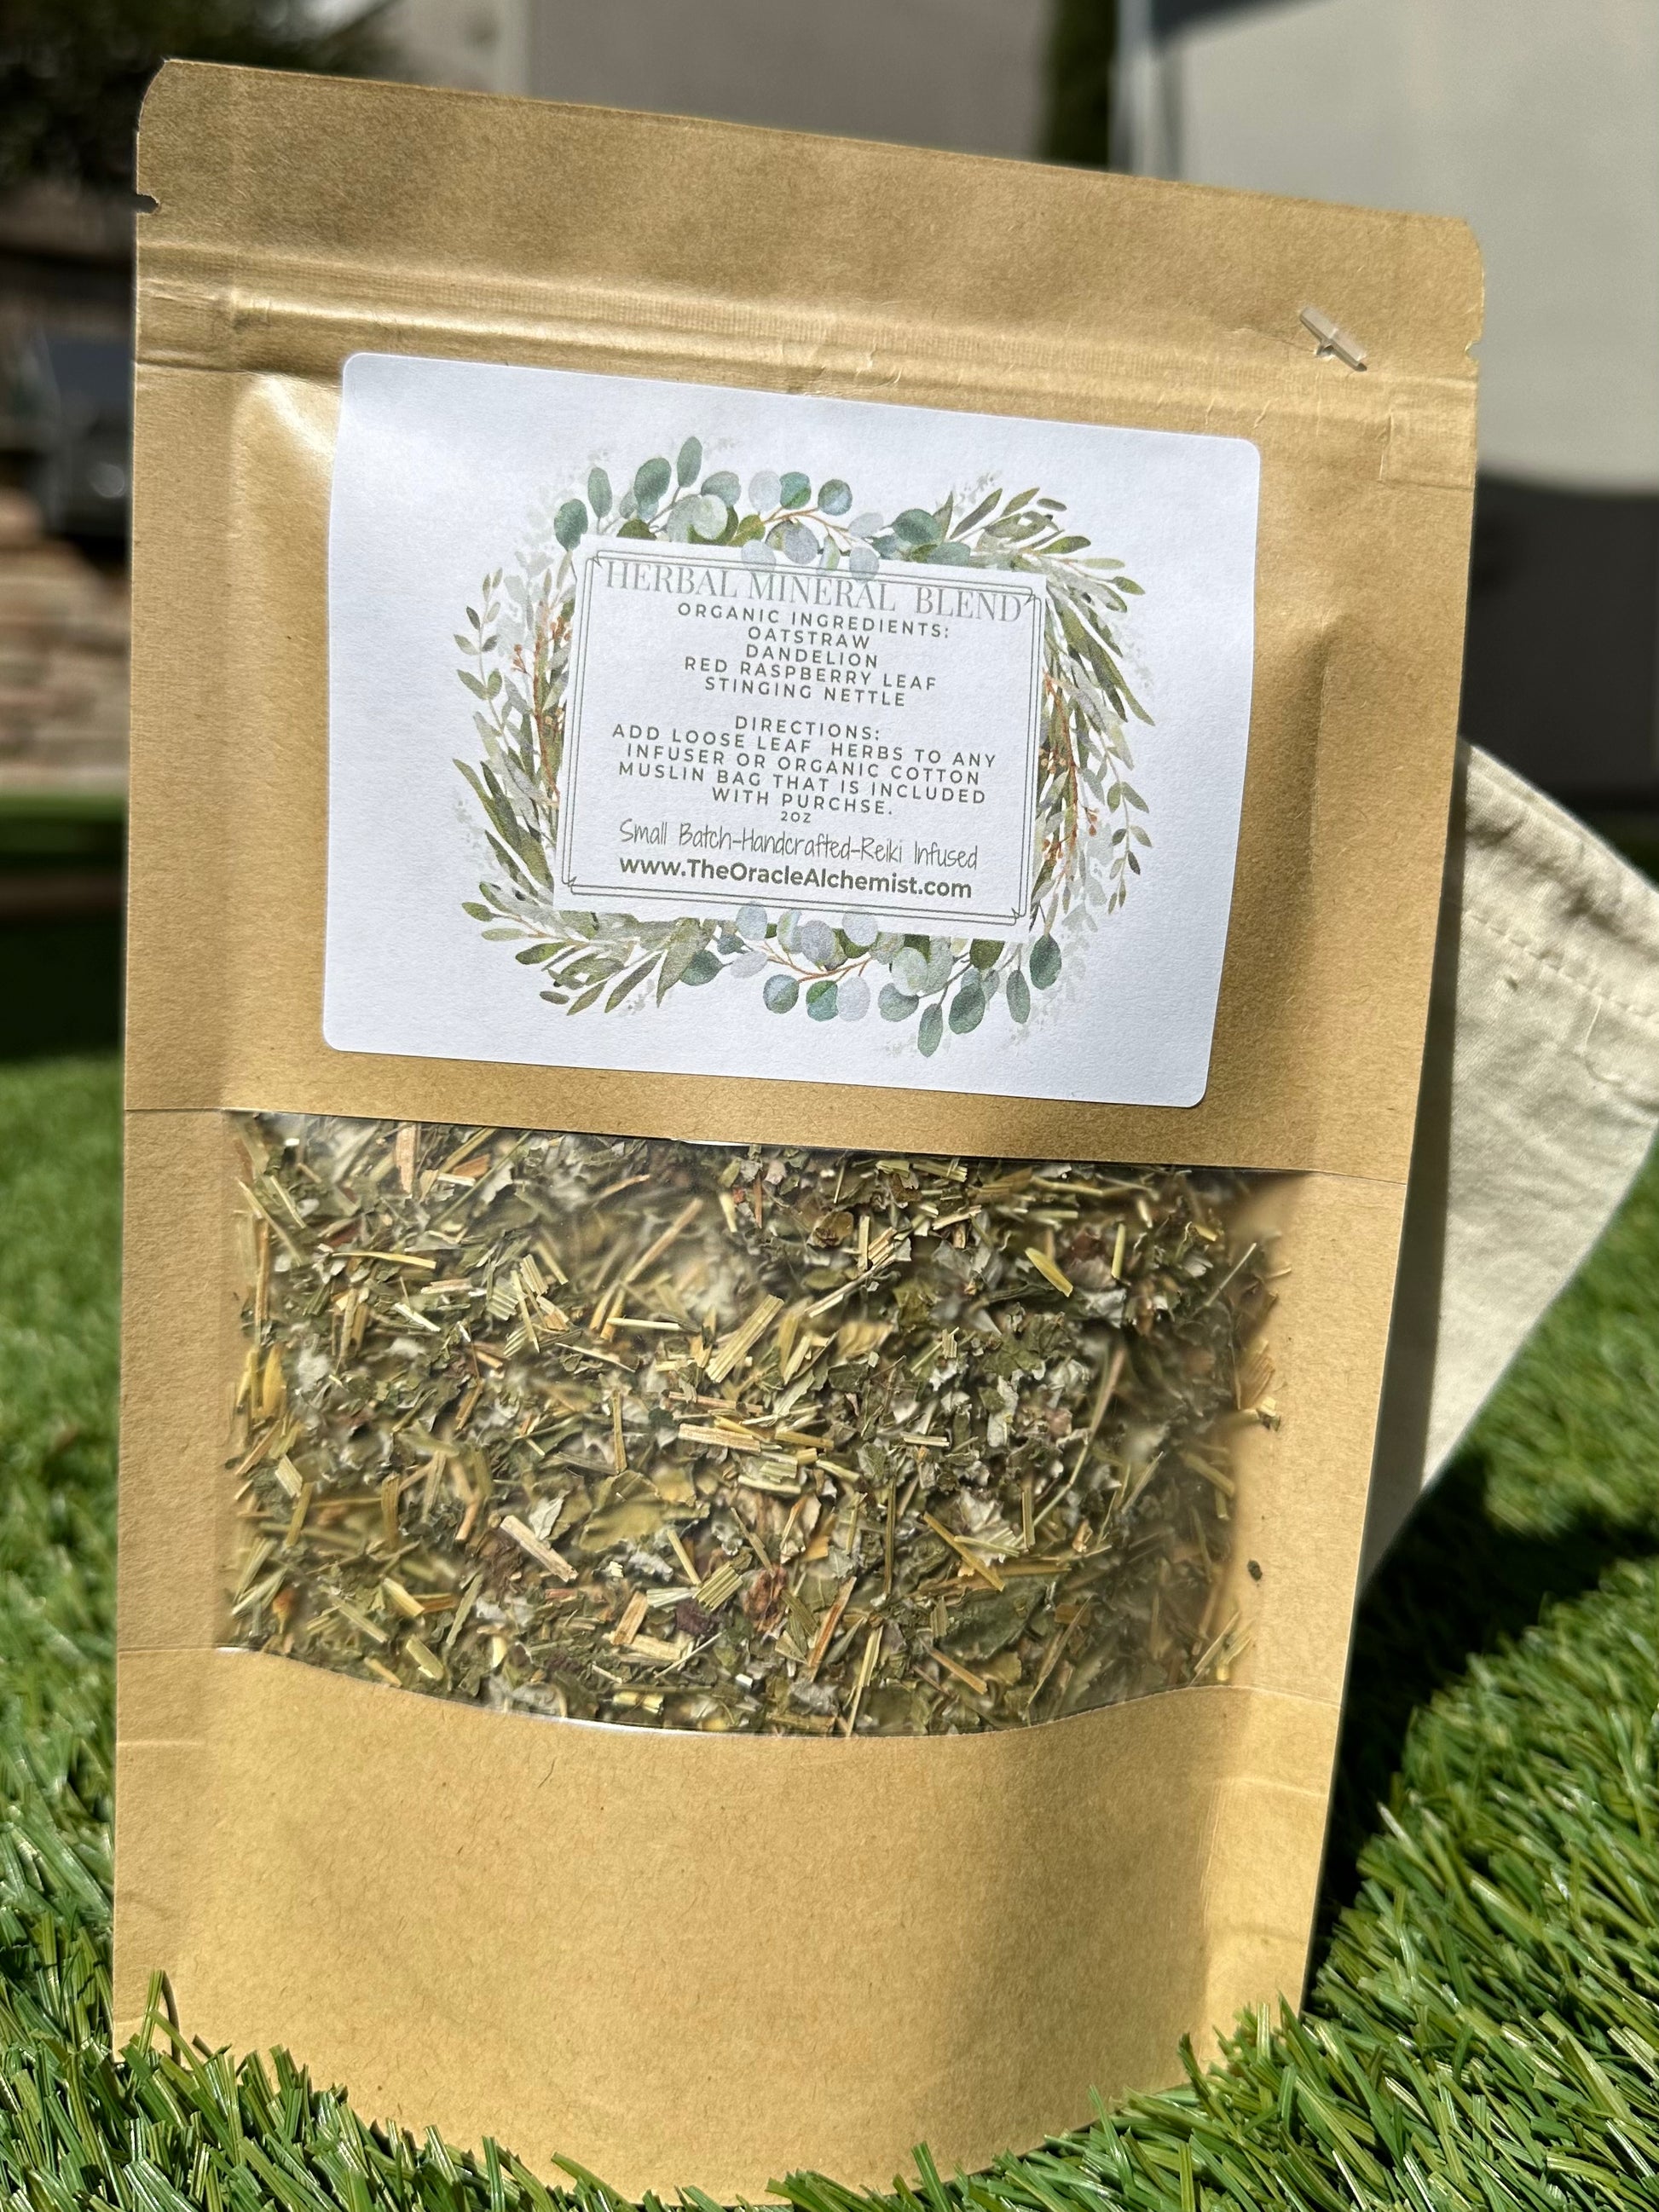 Herbal Mineral Blend - The Oracle Alchemist